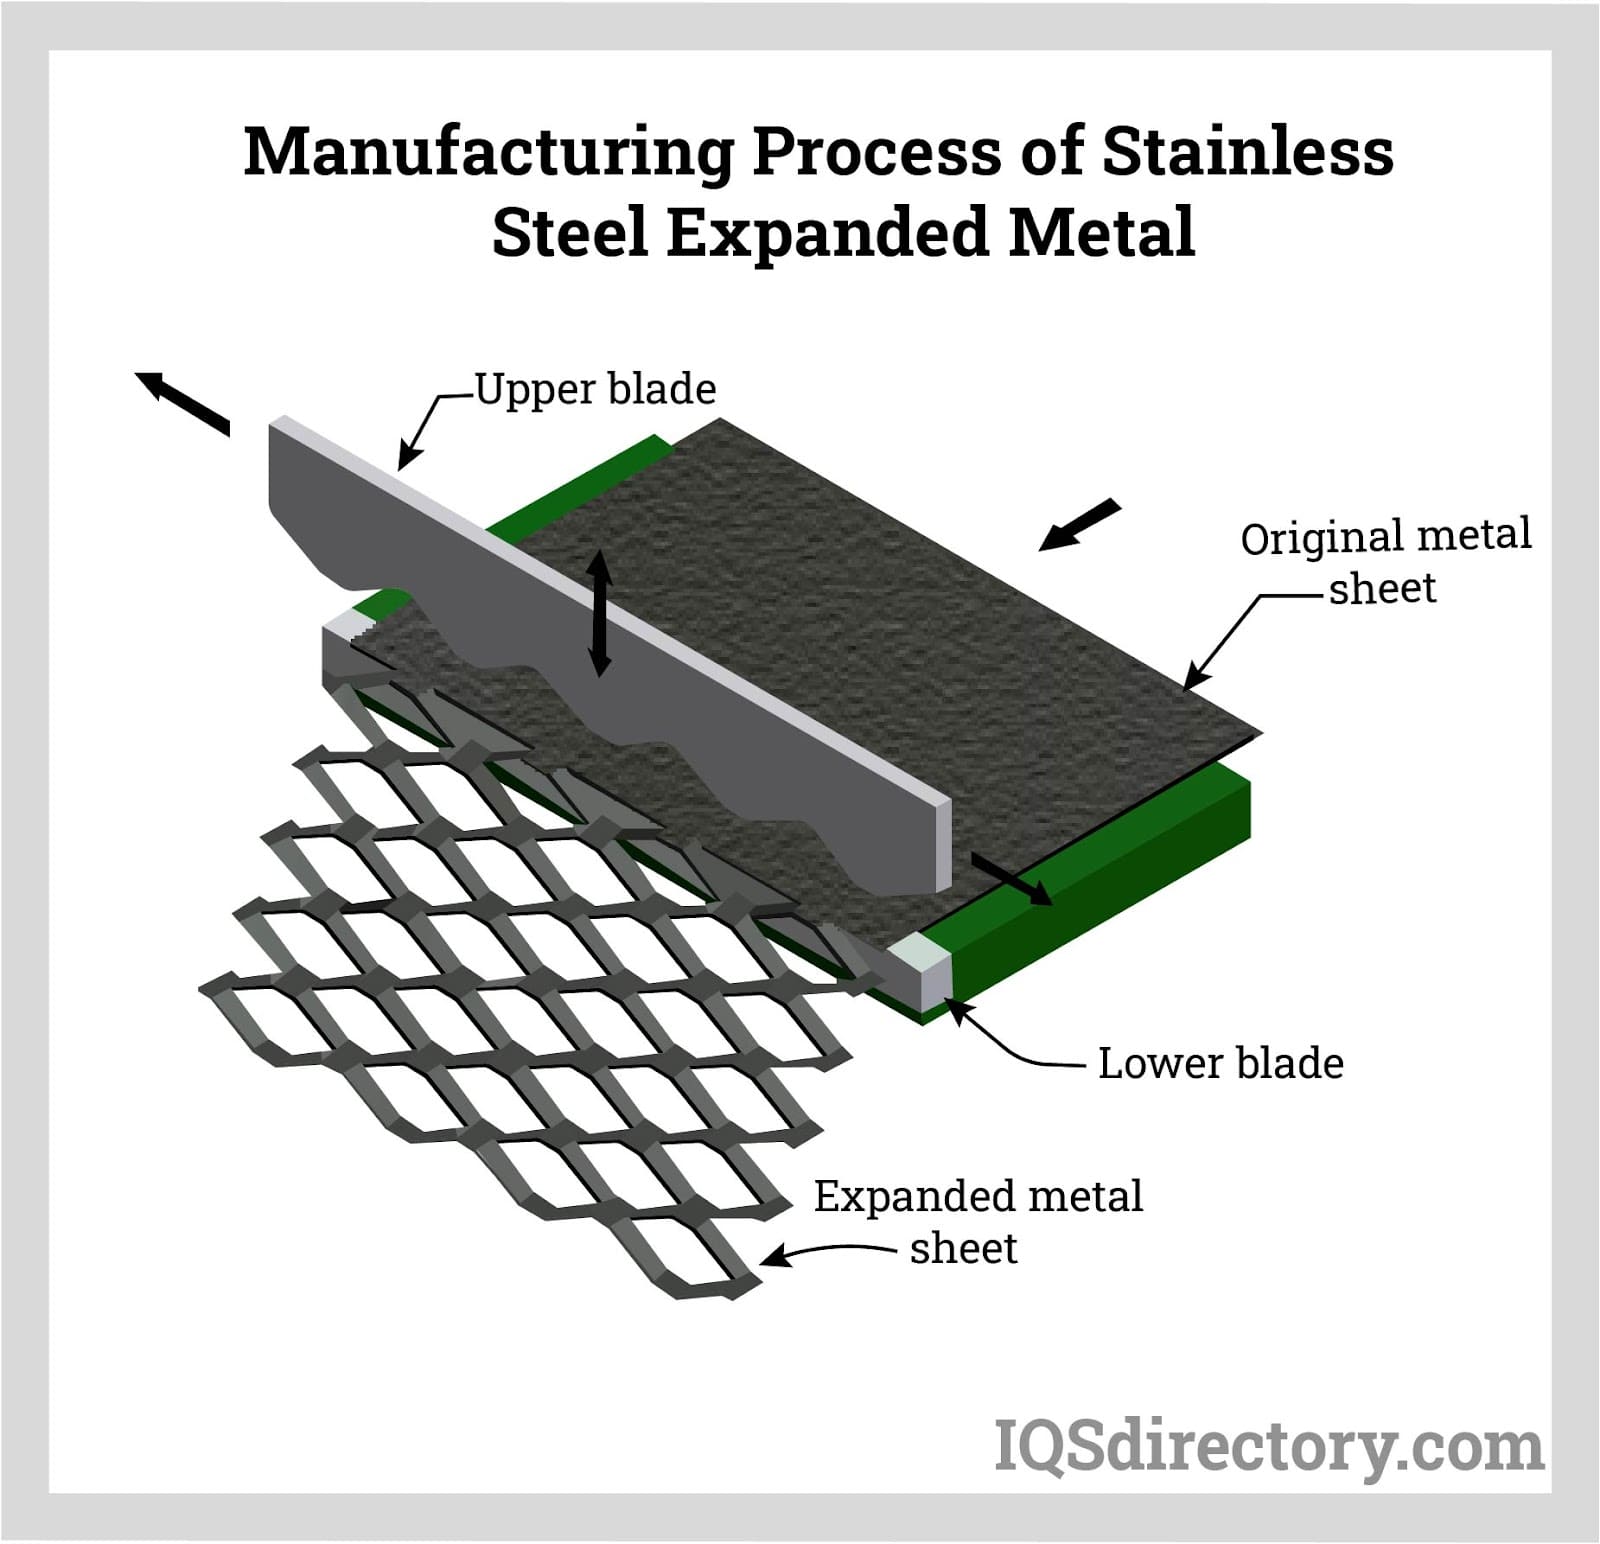 Manufacturing Process of Stainless Steel Expanded Metals